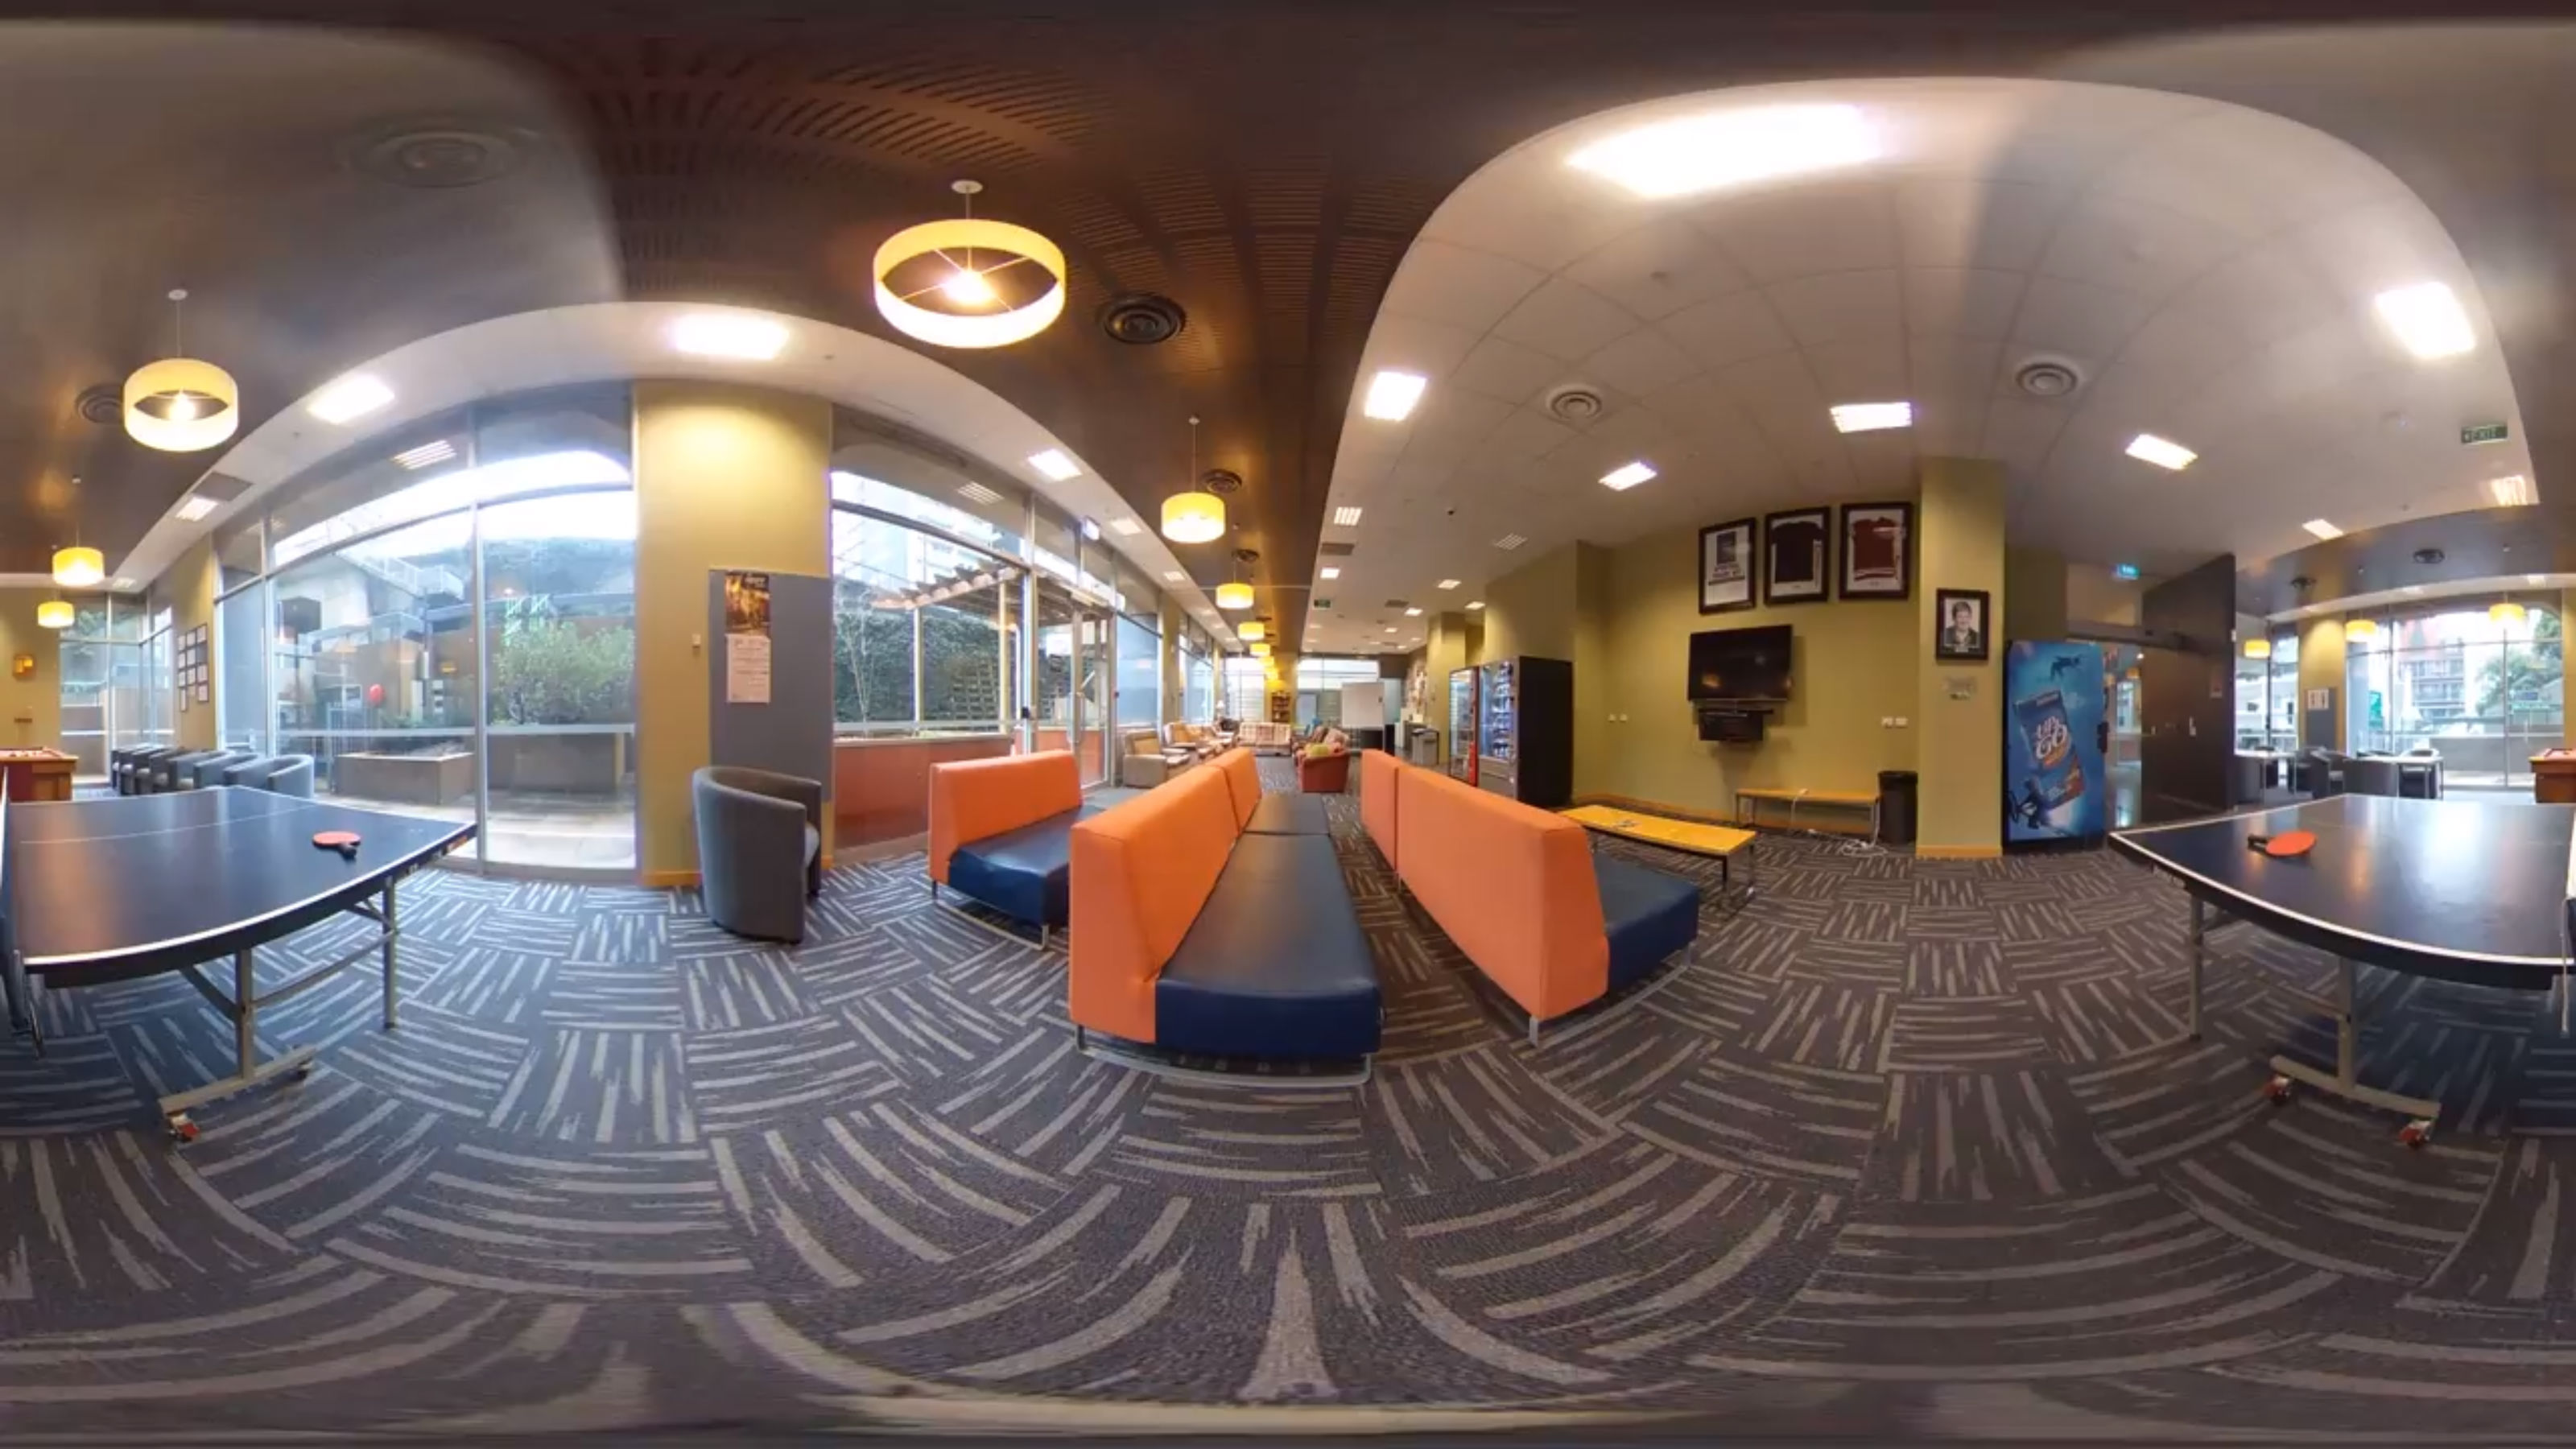 A panoramic view of a common space with orange sofas, a television, and ping pong table.